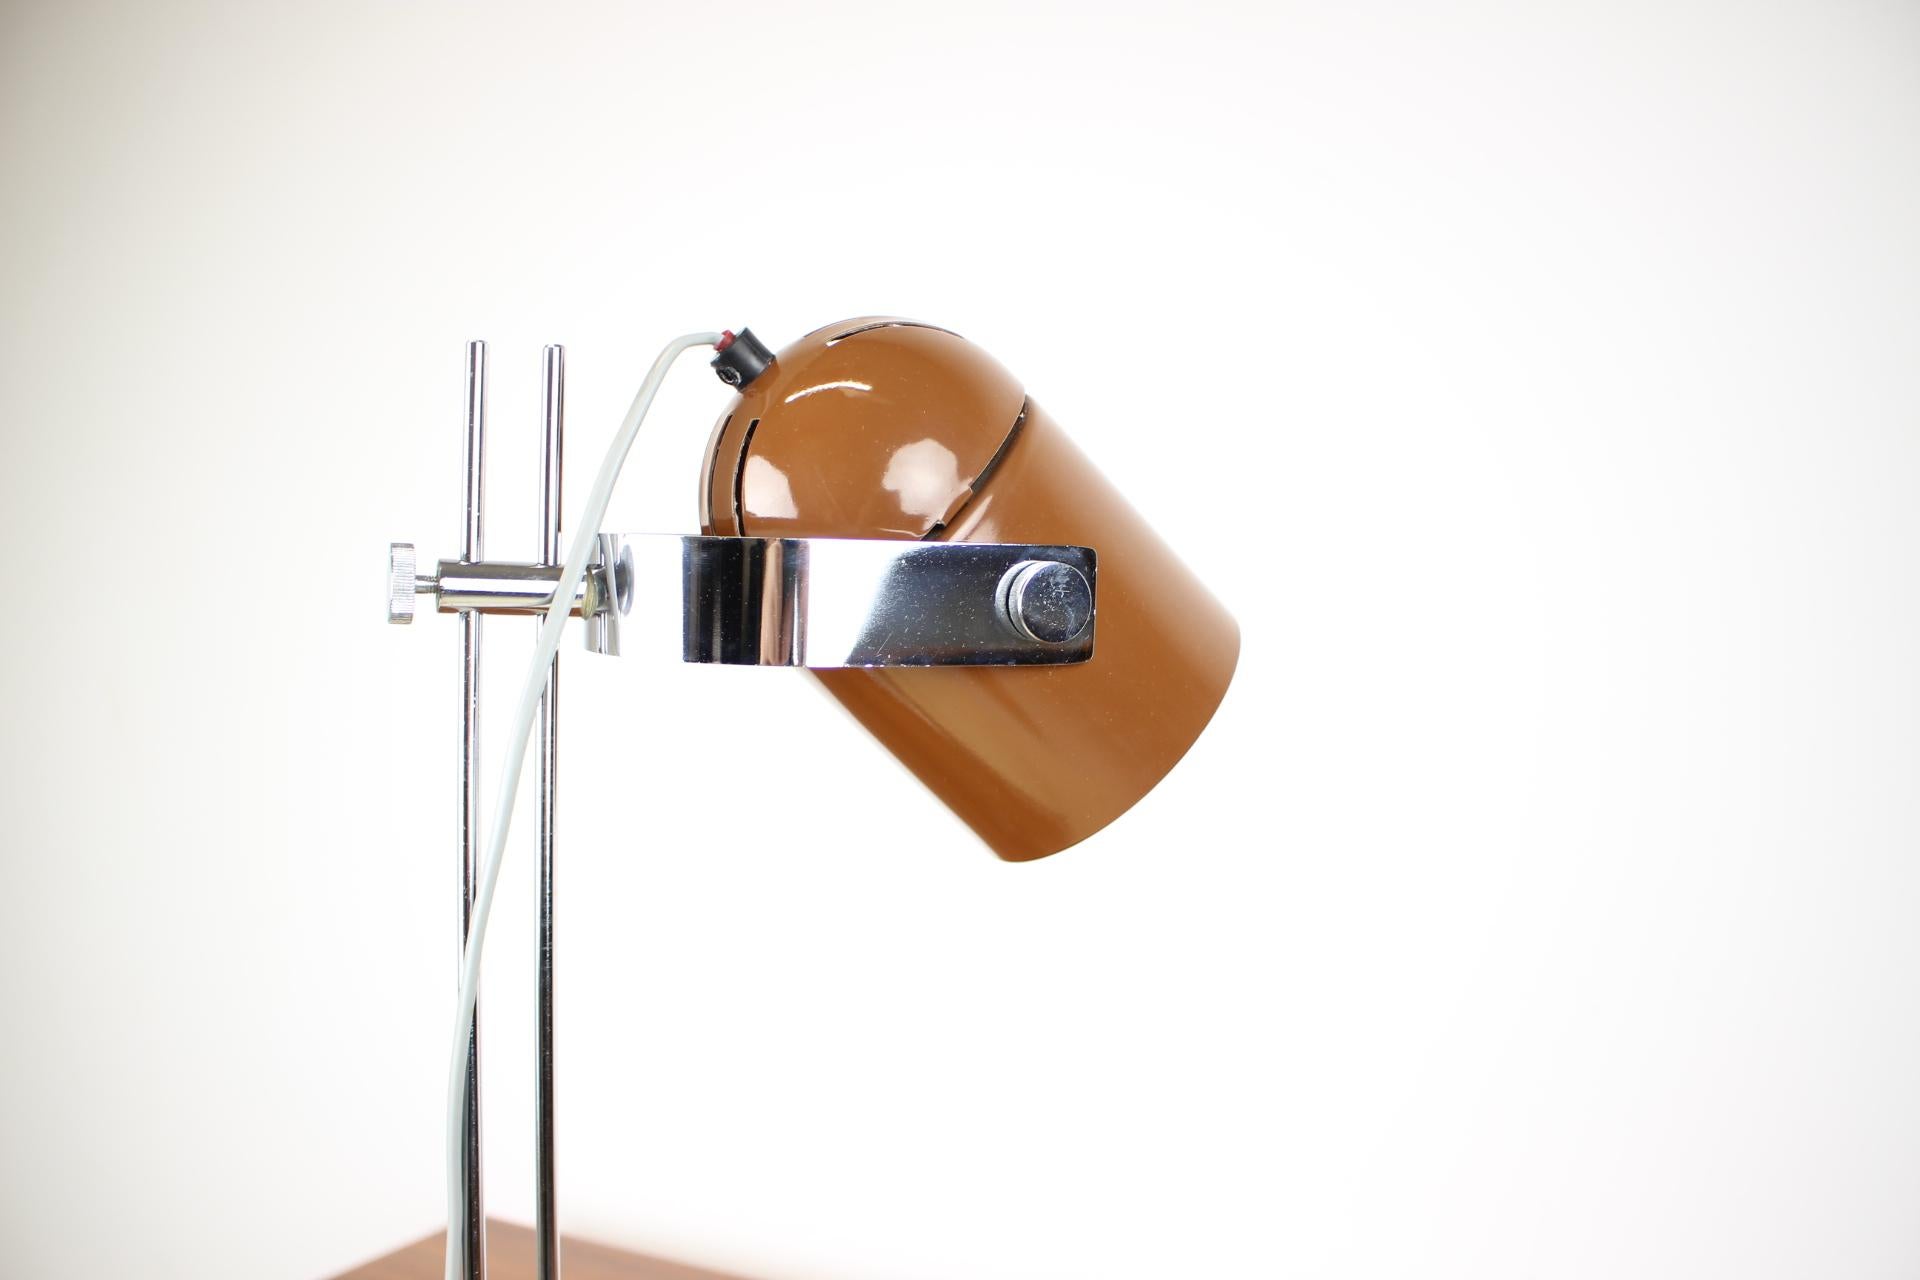 Czech Mid-Century Adjustable Table Lamp Designed by Stanislav Indra, 1970's For Sale